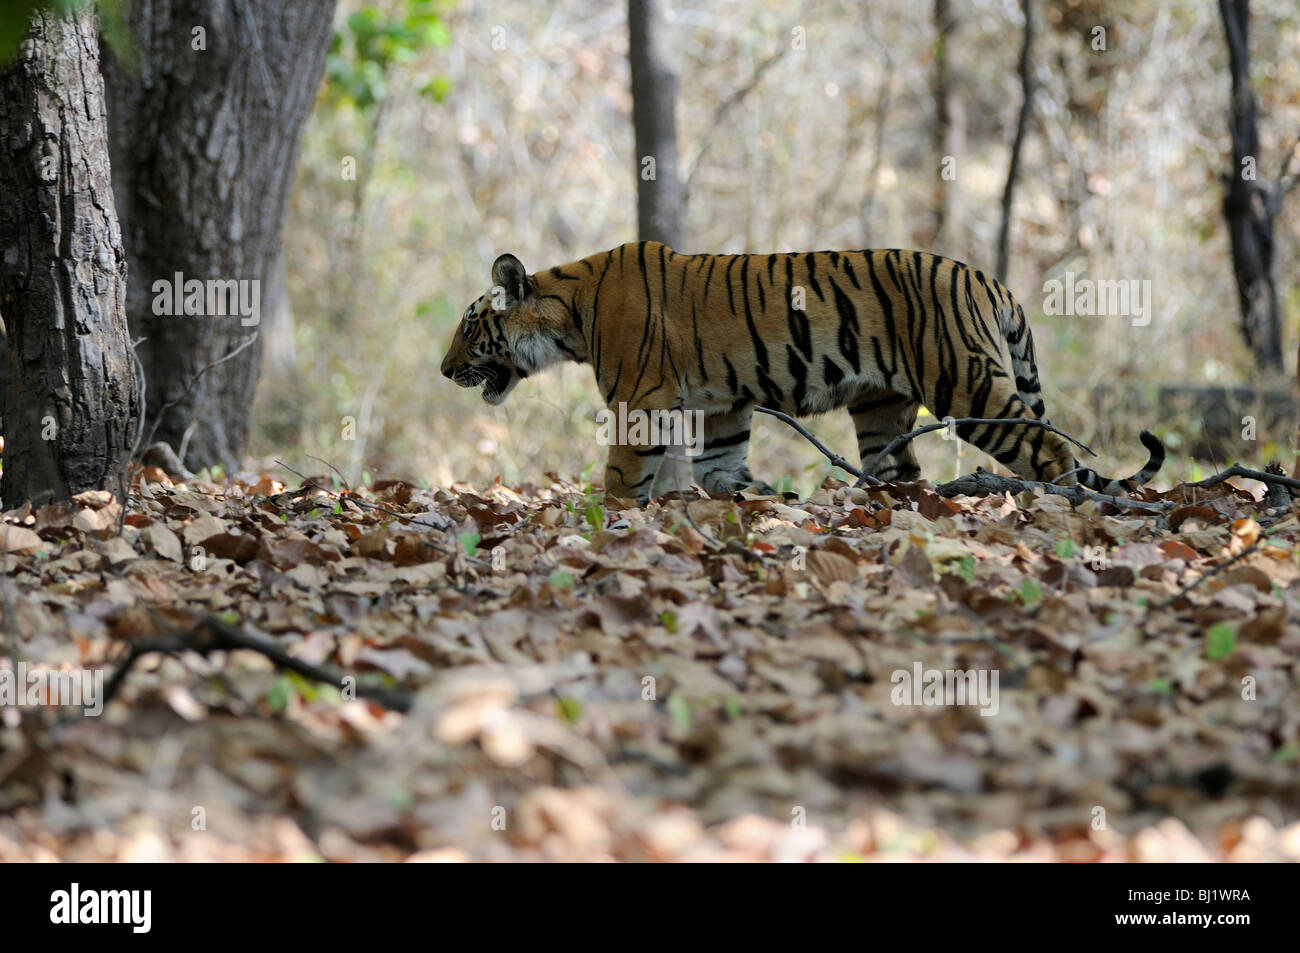 Bengal Tiger Cub Walking through the forest floor filled with leaves, shot in bandhavgarh tiger reserve, India Stock Photo